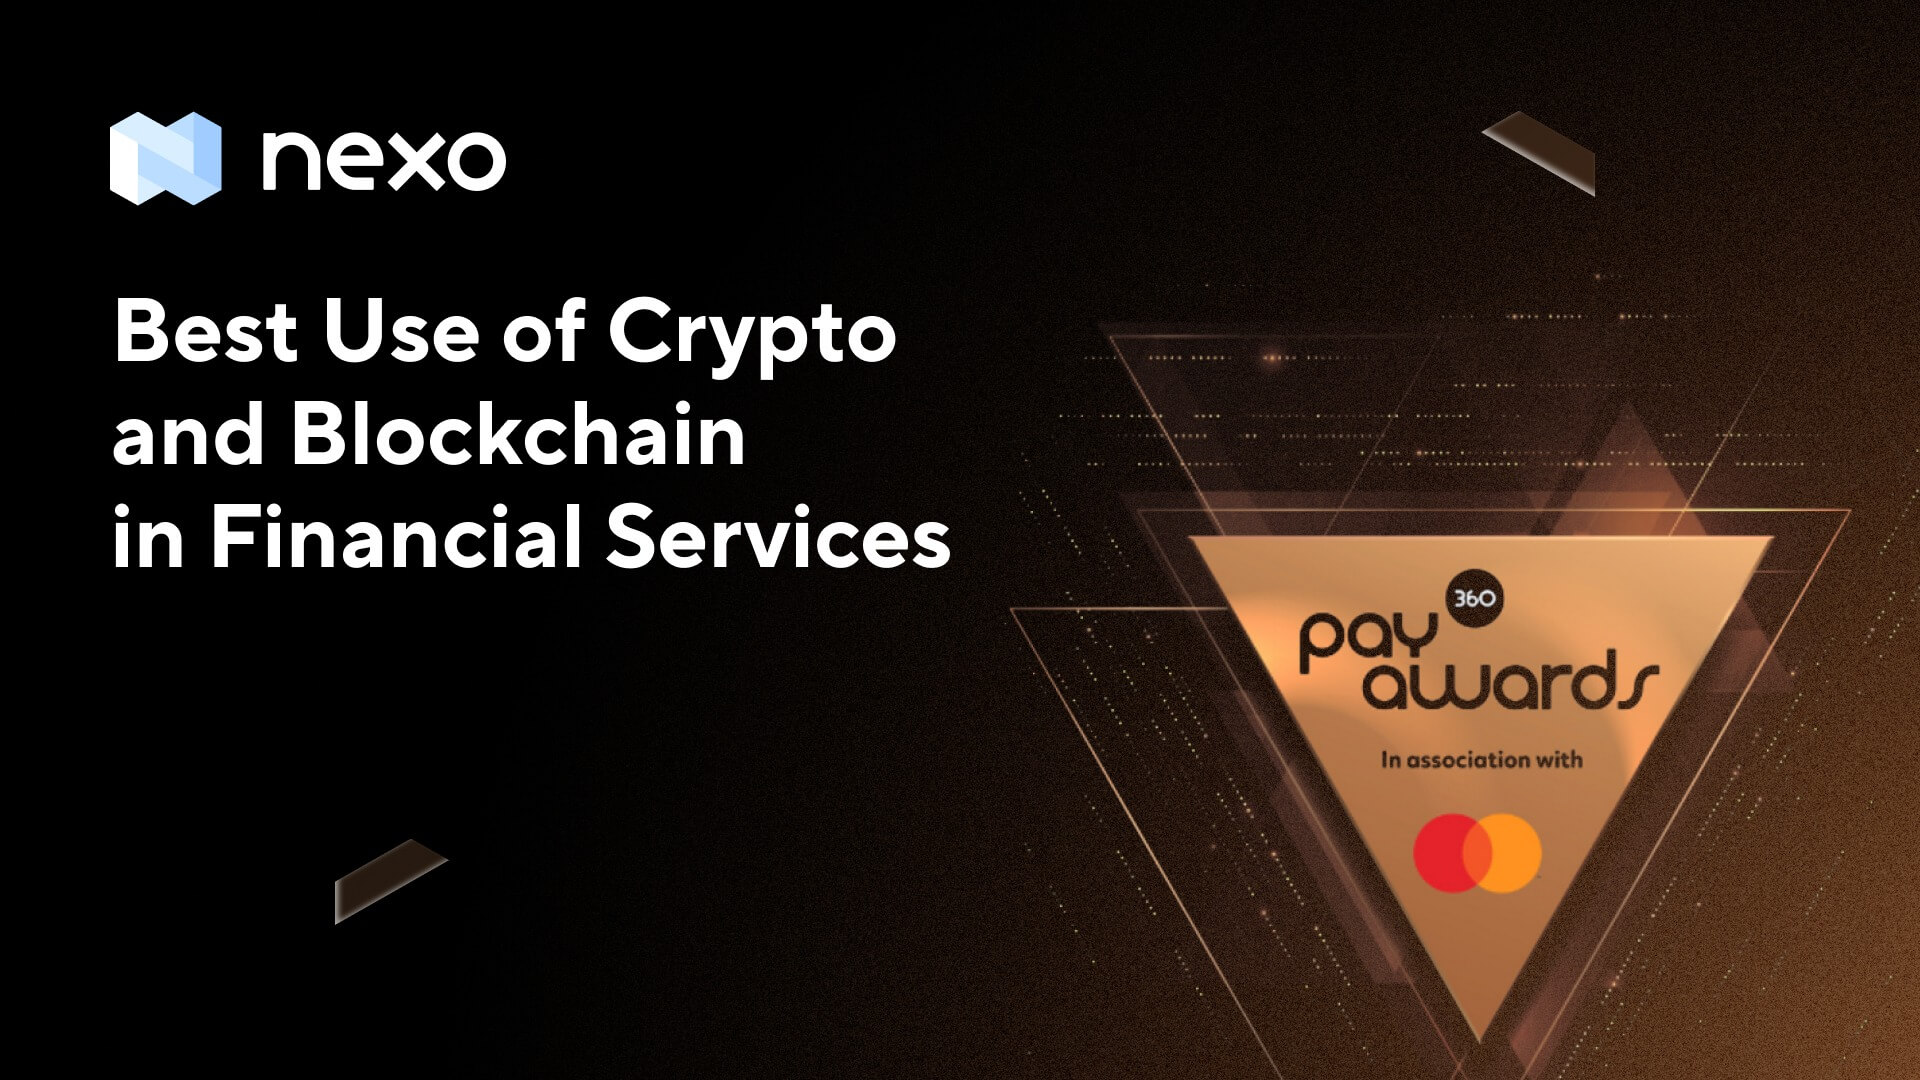 Nexo wins “Best Use of Crypto and/or Blockchain in Financial Services” at 2022 PAY360 Awards